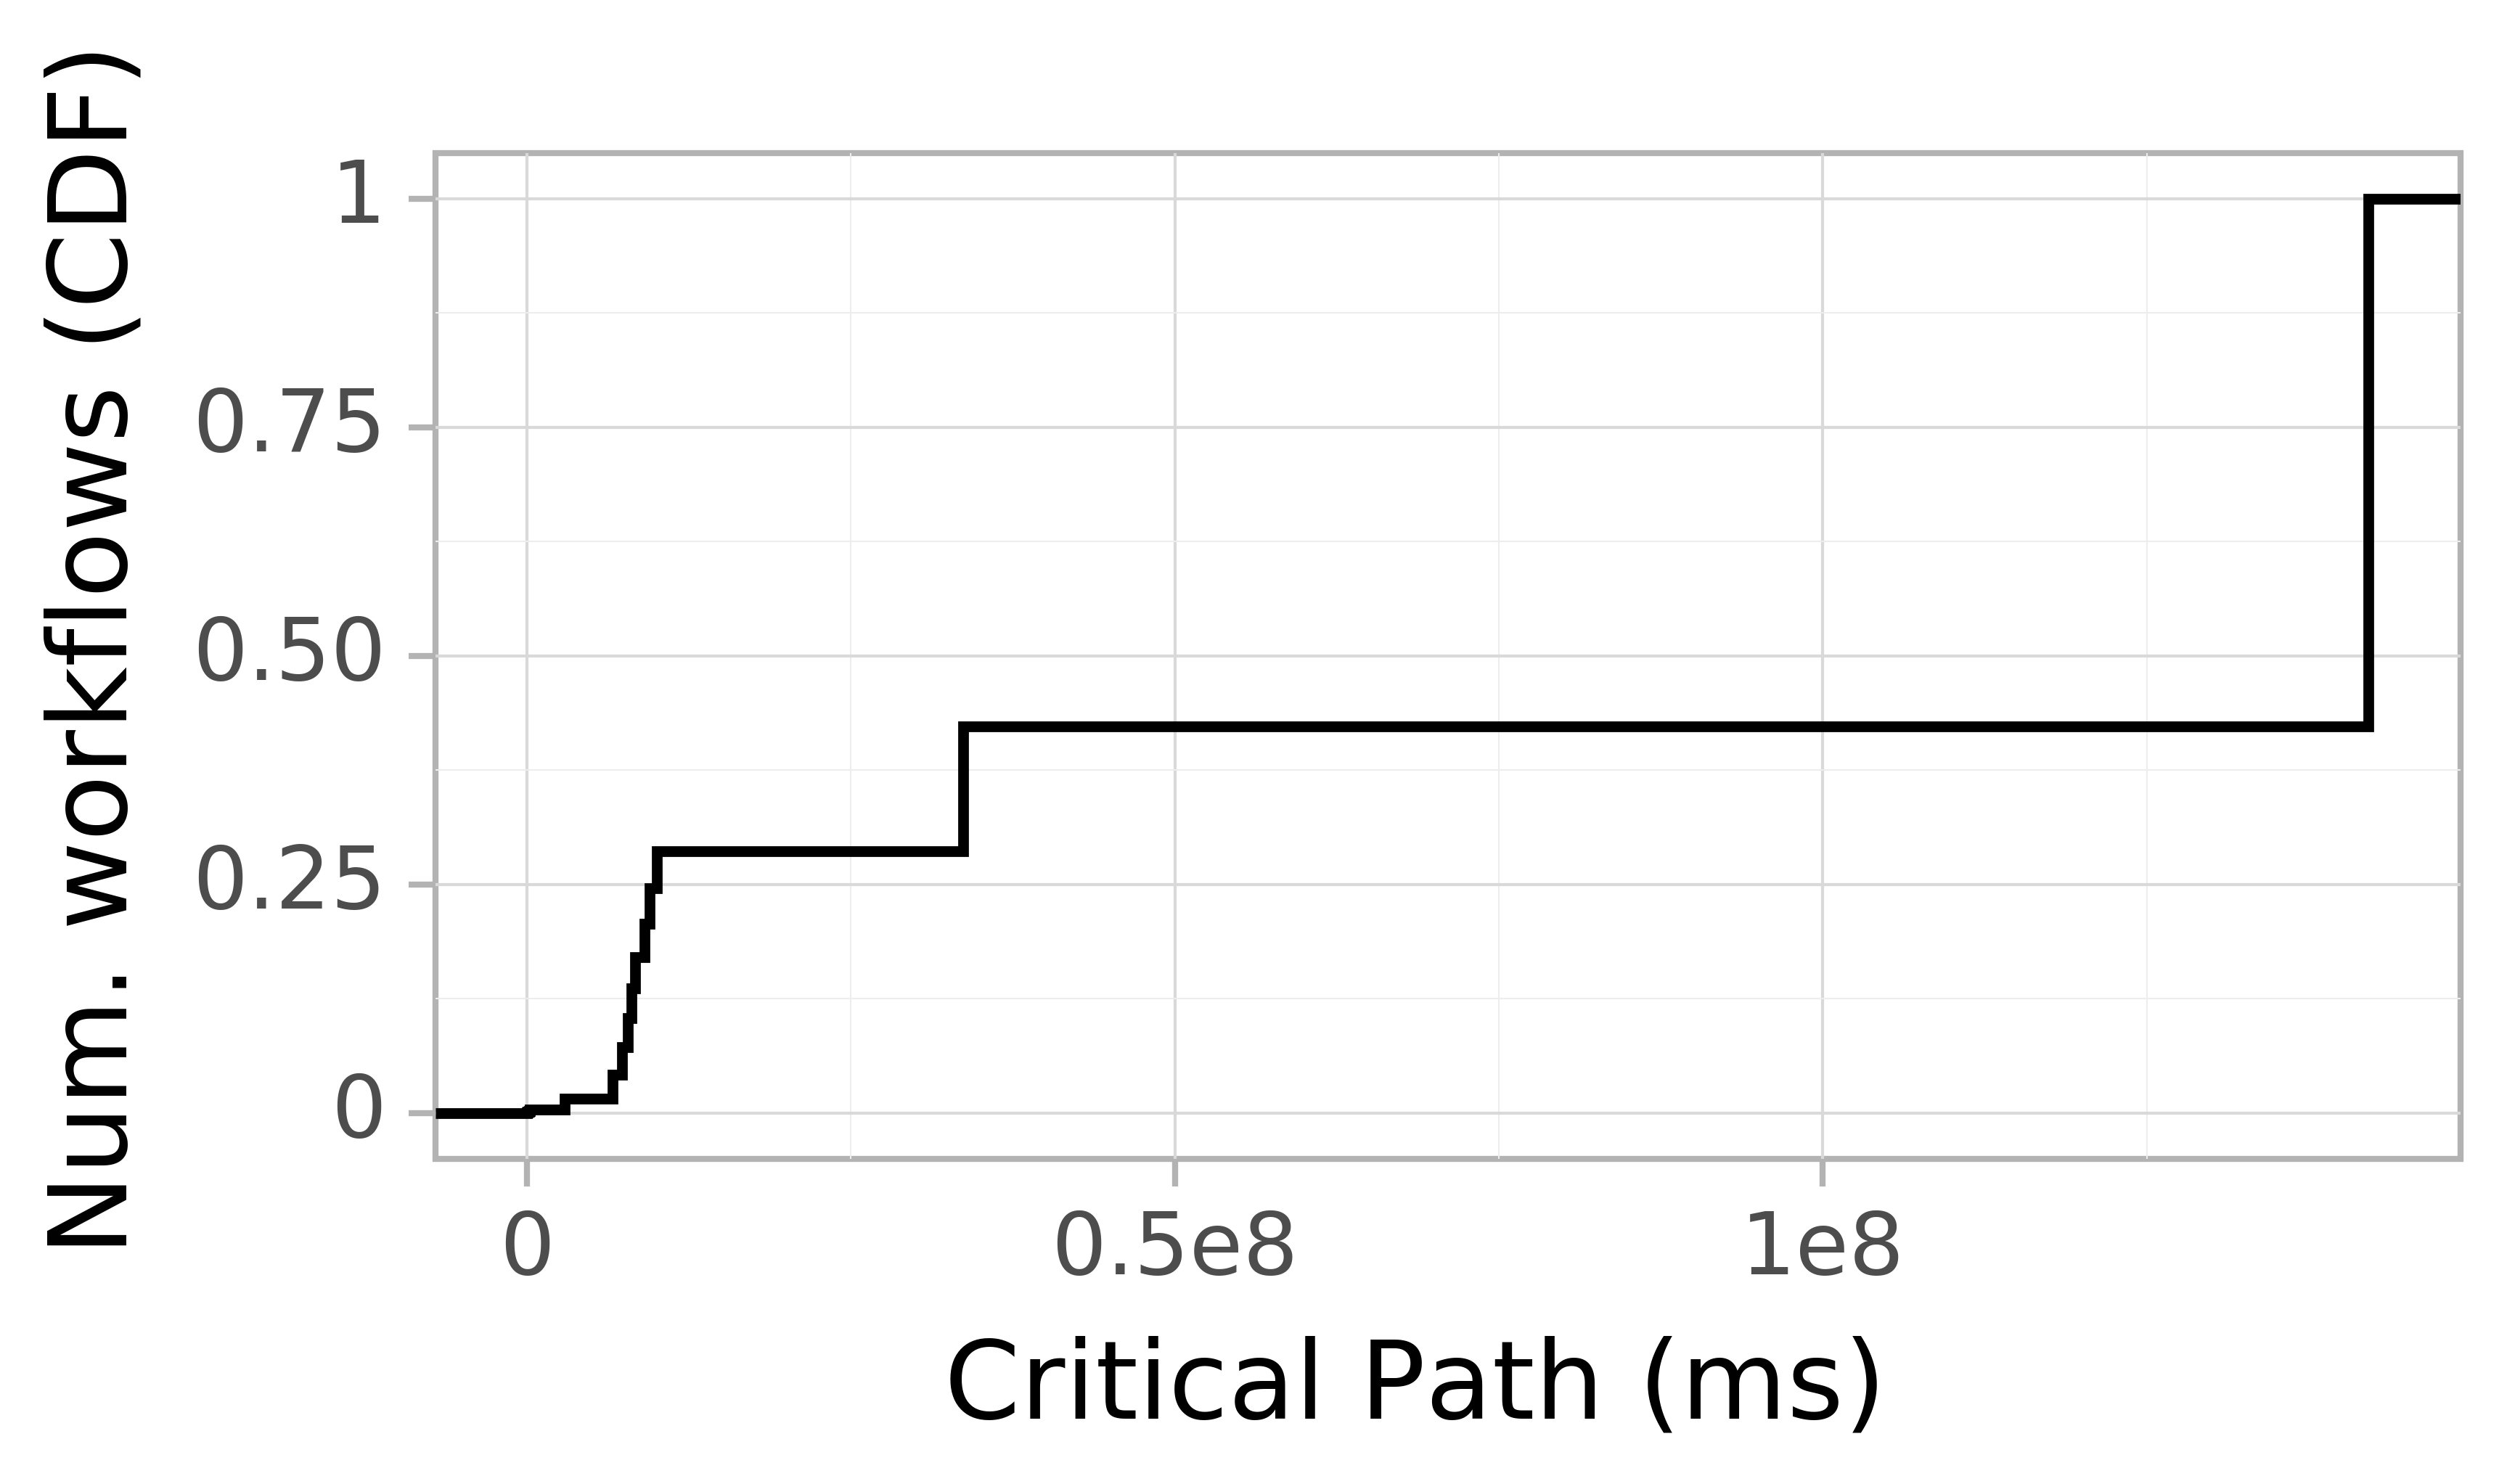 Job runtime CDF graph for the Pegasus_P7 trace.